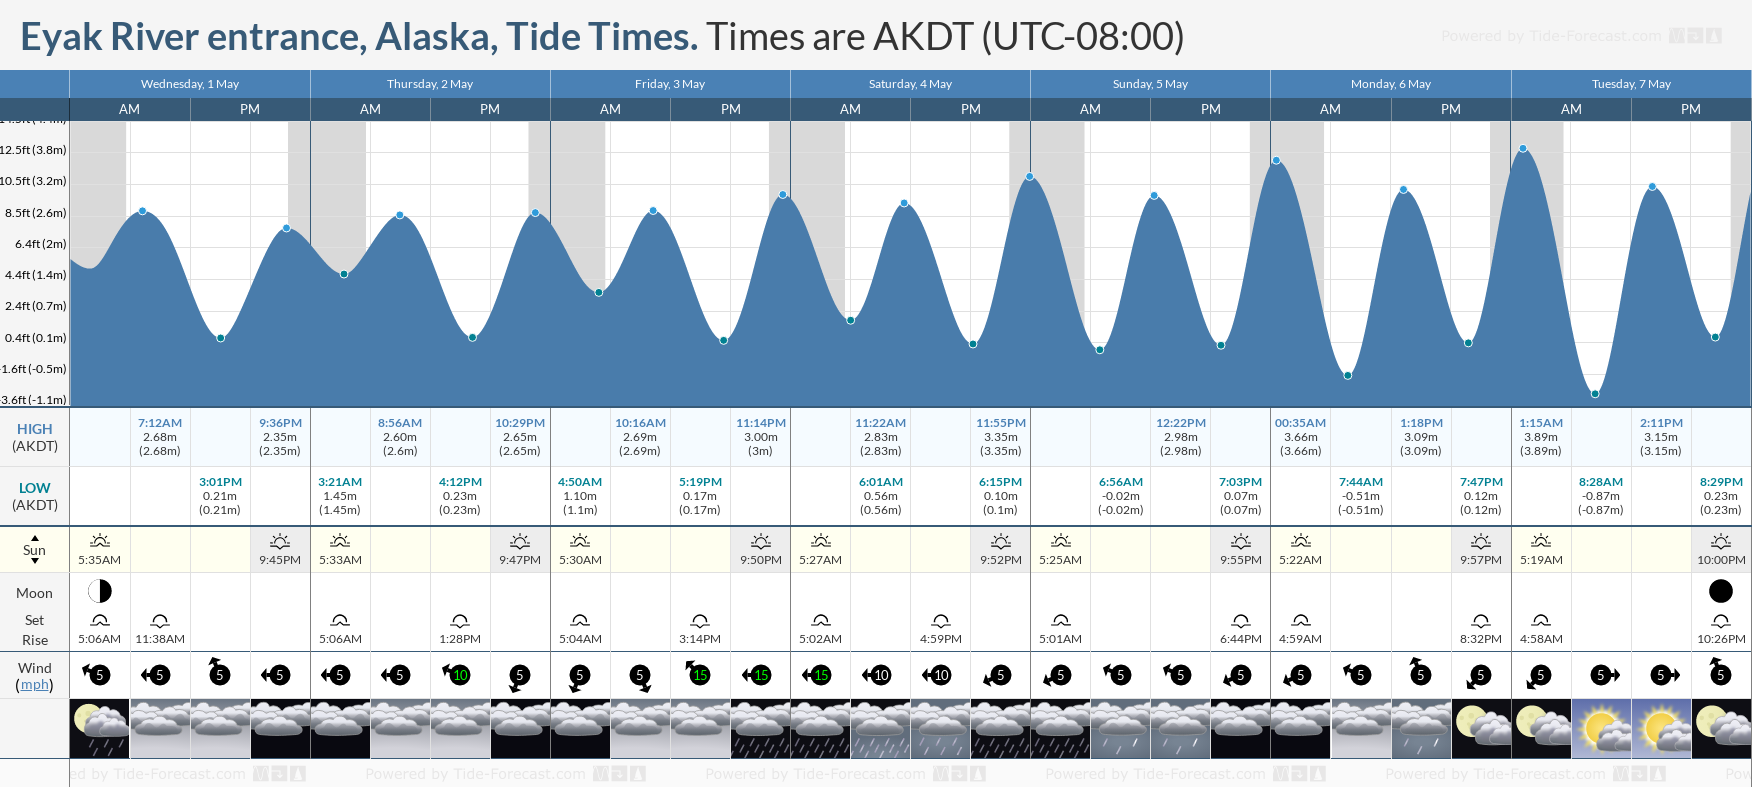 Eyak River entrance, Alaska Tide Chart including high and low tide times for the next 7 days